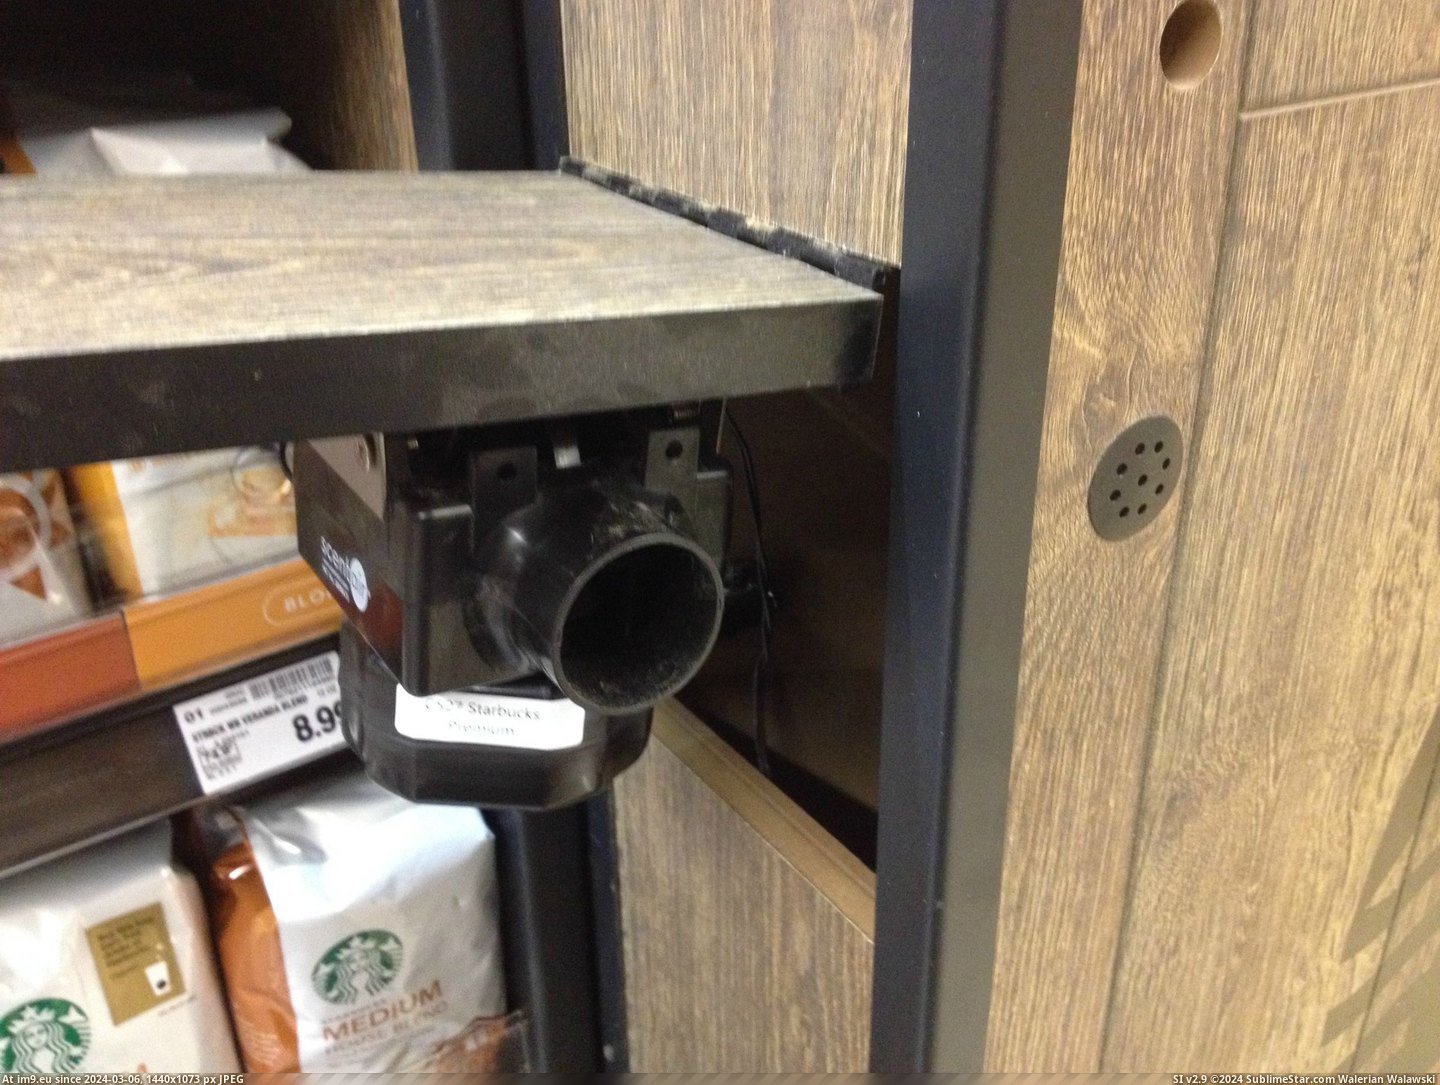 #Work #New #Secret #Smell #Delivery #Starbucks #Coffee #System #Display [Mildlyinteresting] The new Starbucks display at my work has a secret coffee smell delivery system. 5 Pic. (Image of album My r/MILDLYINTERESTING favs))